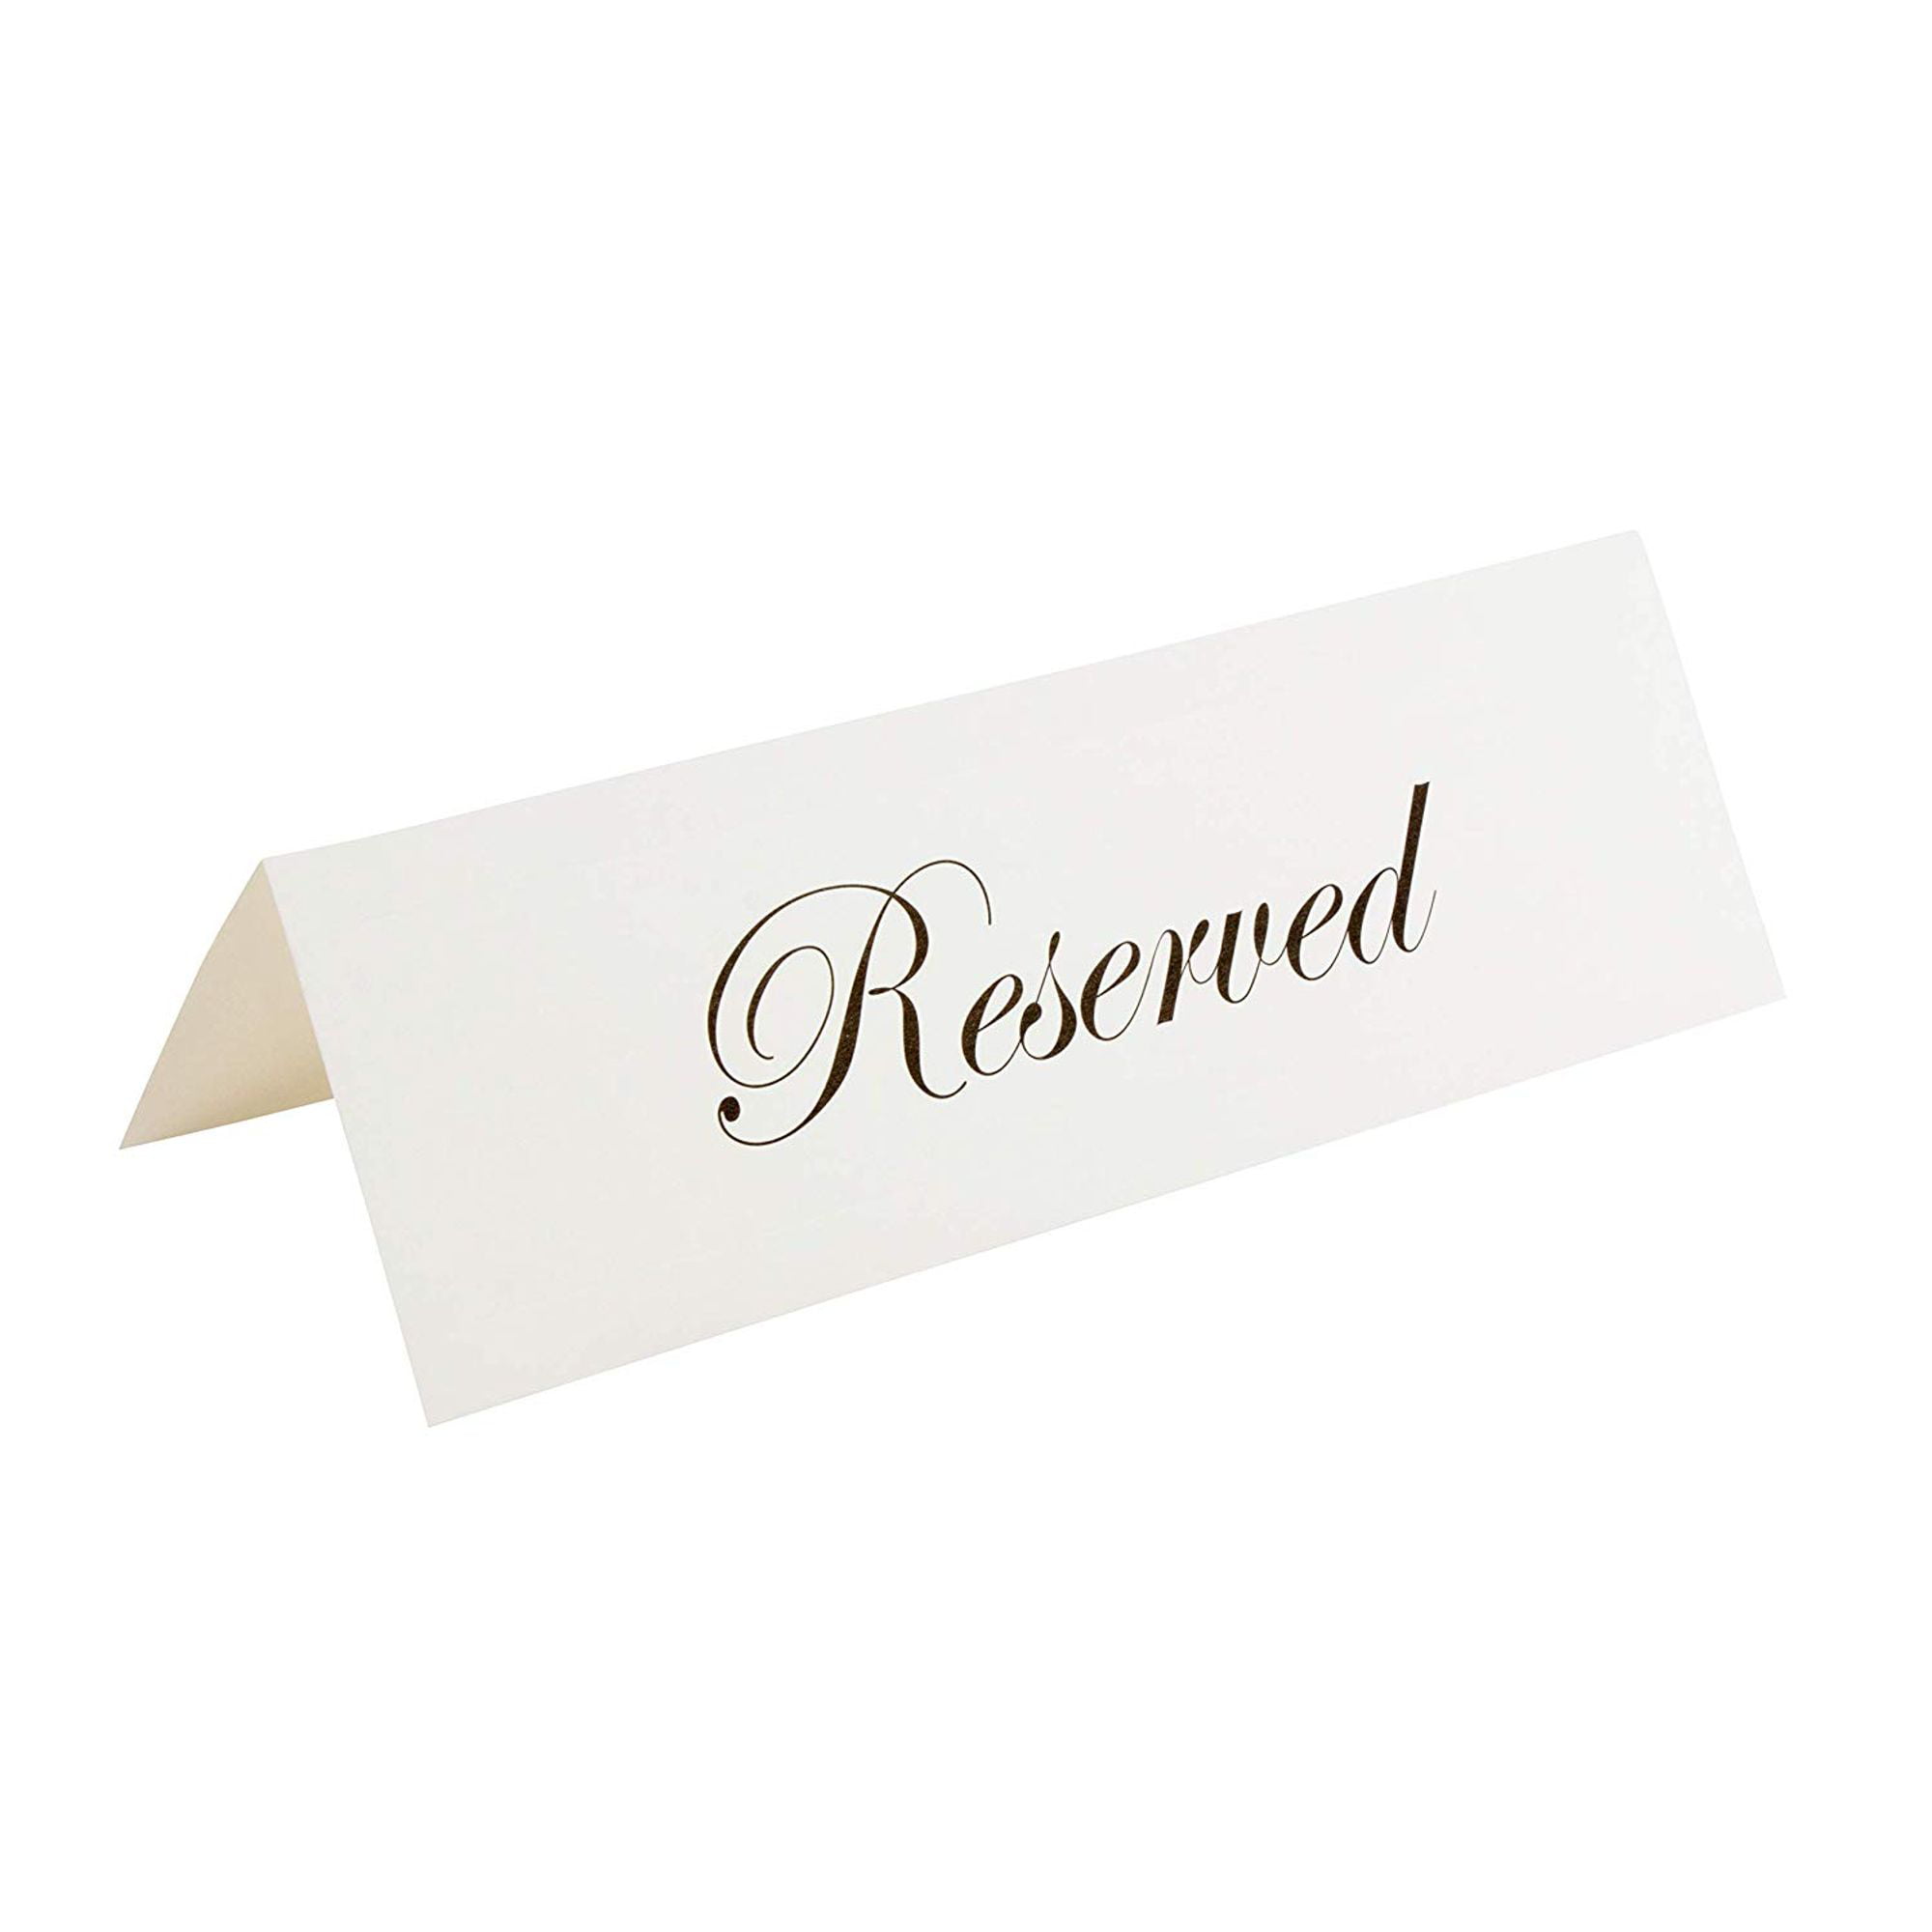 Details about   180pc Tent Place Card Printable for Wedding Party Restaurant Reservation 1.4x3.8 